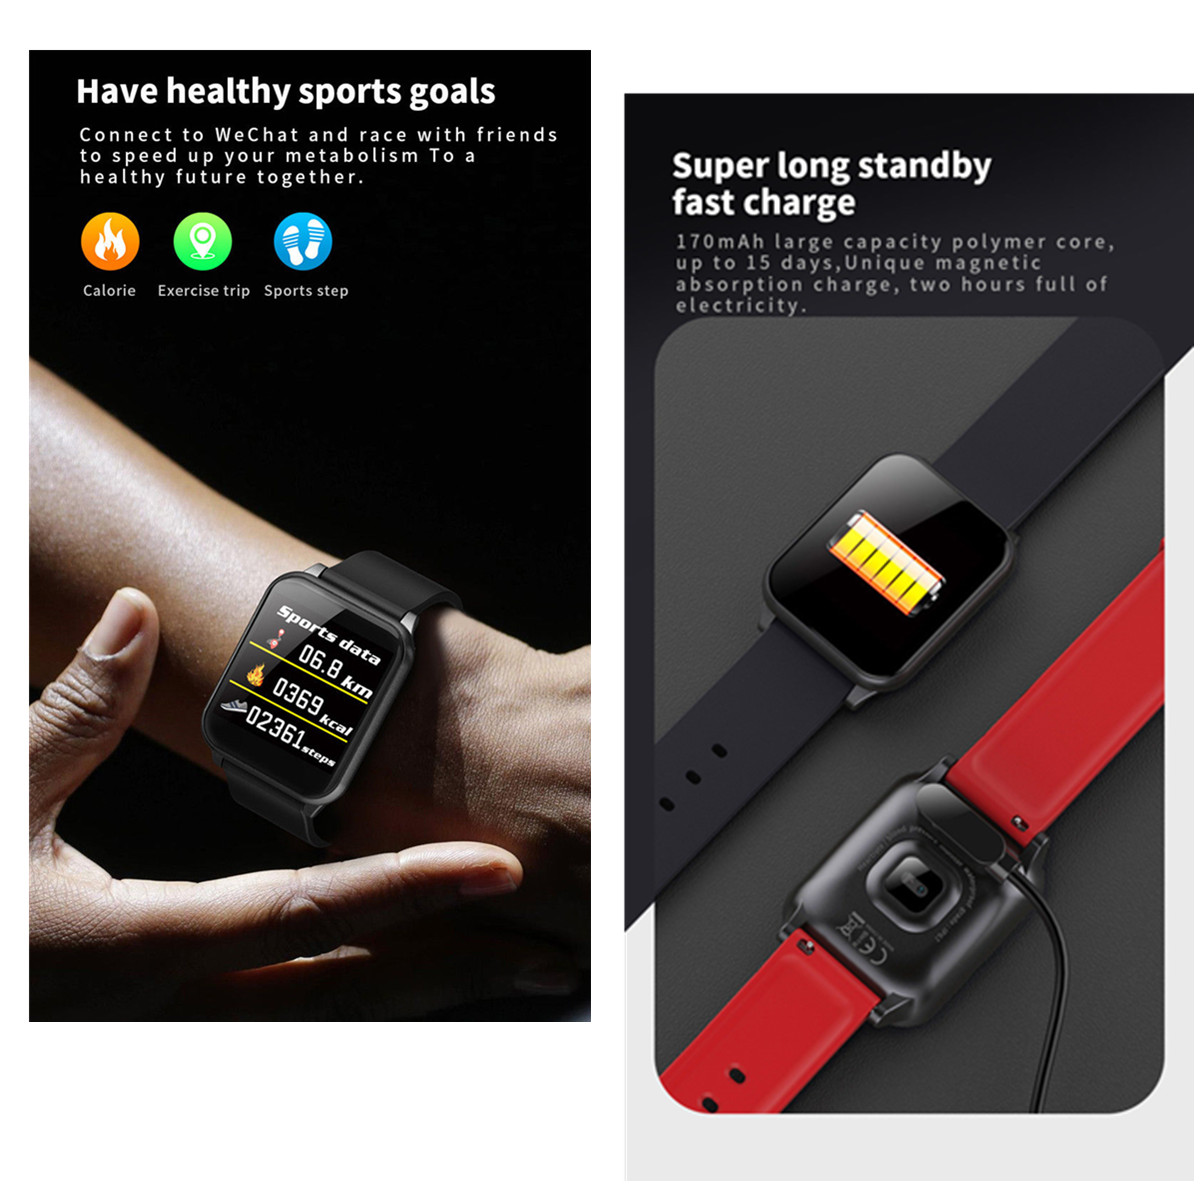 Z02 1.3 Inch IPS Display Touch Screen IP67 Waterproof Heart Rate Monitor Smart Watch Bracelet Wristband For iOS Android